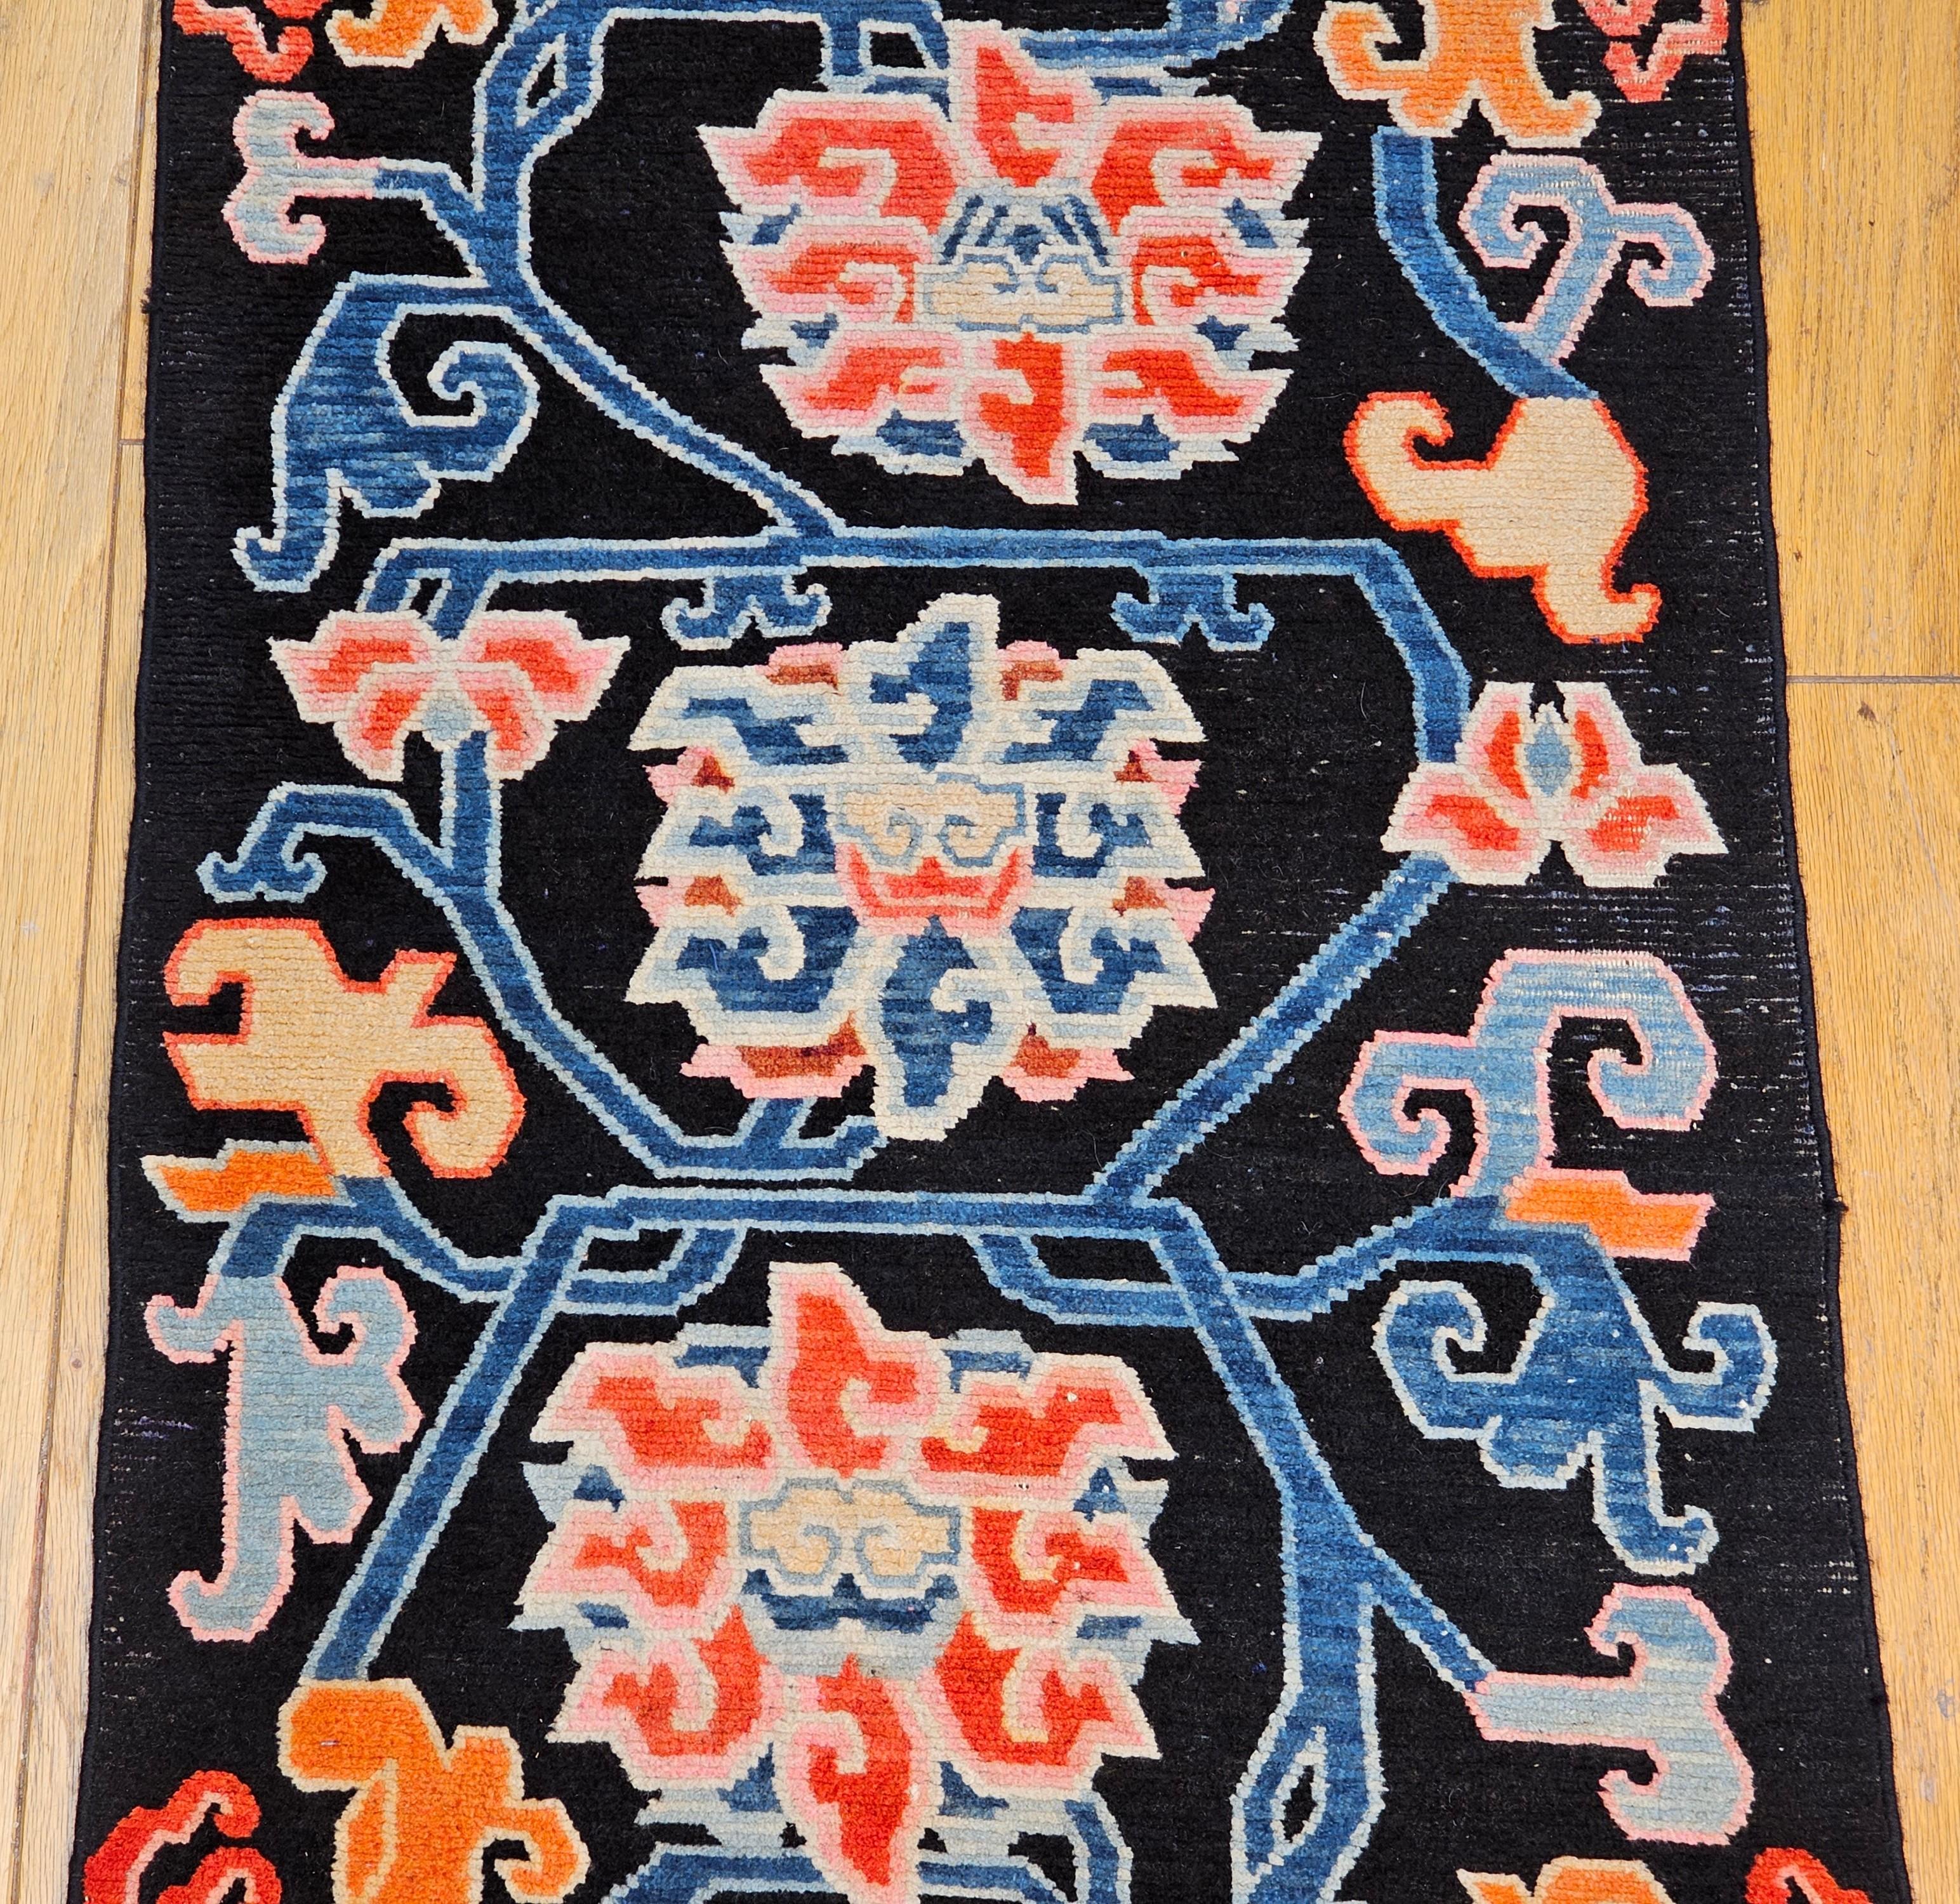 Vintage Tibetan Rug with Lotus Flowers and Cloud Symbols in French Blue and Red In Good Condition For Sale In Barrington, IL